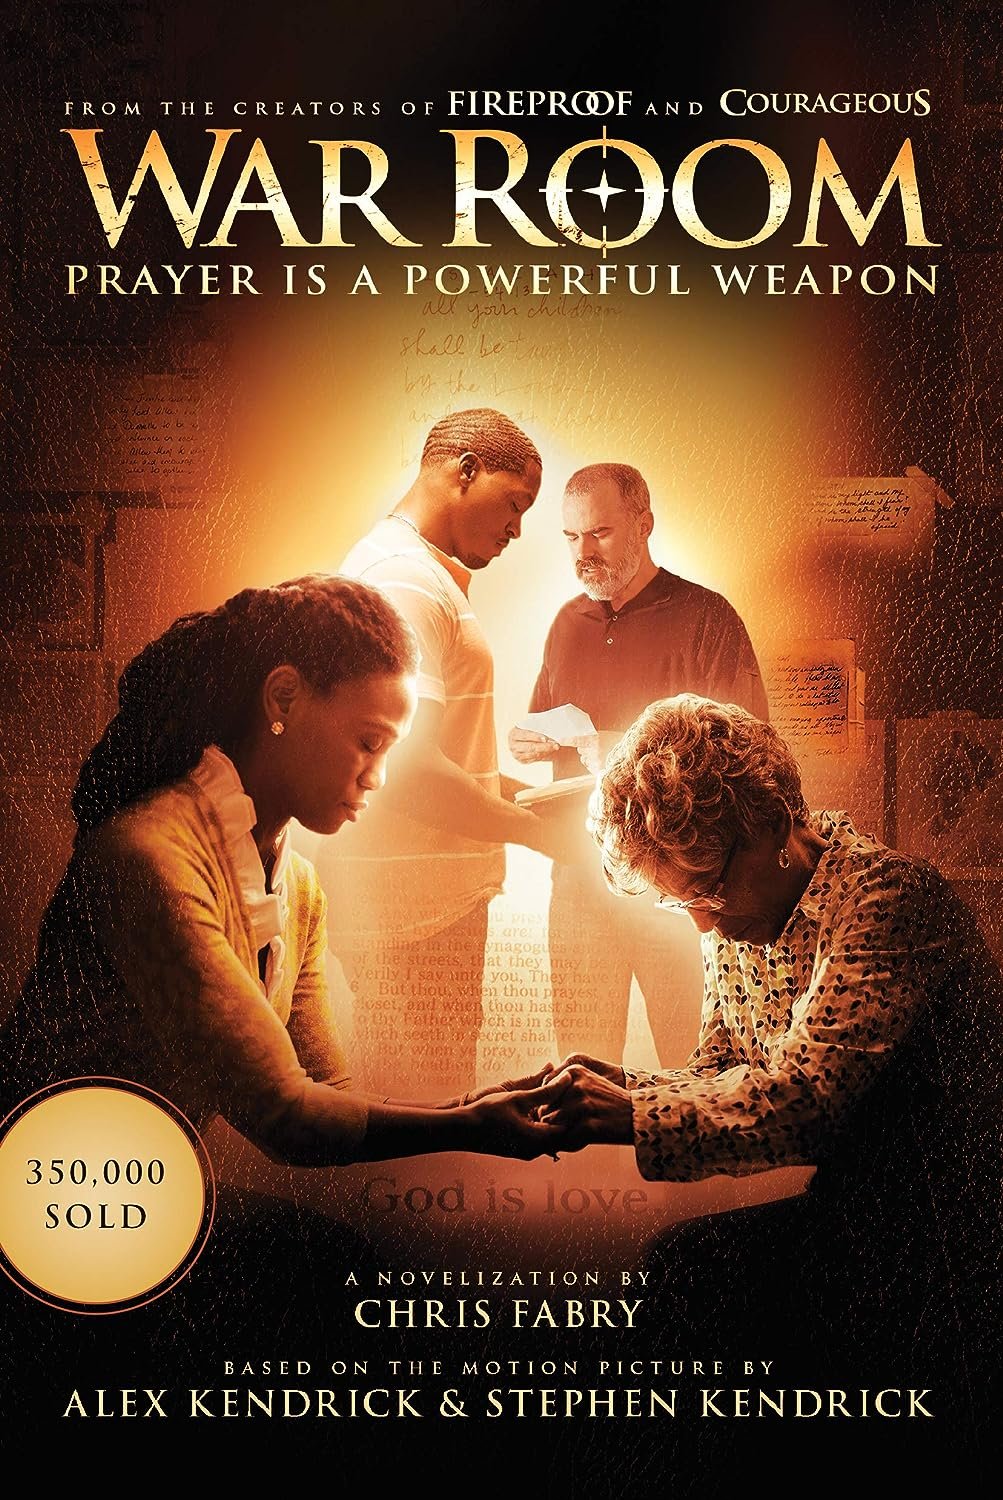 “War Room: Prayer Is a Powerful Weapon” - by Chris Fabry